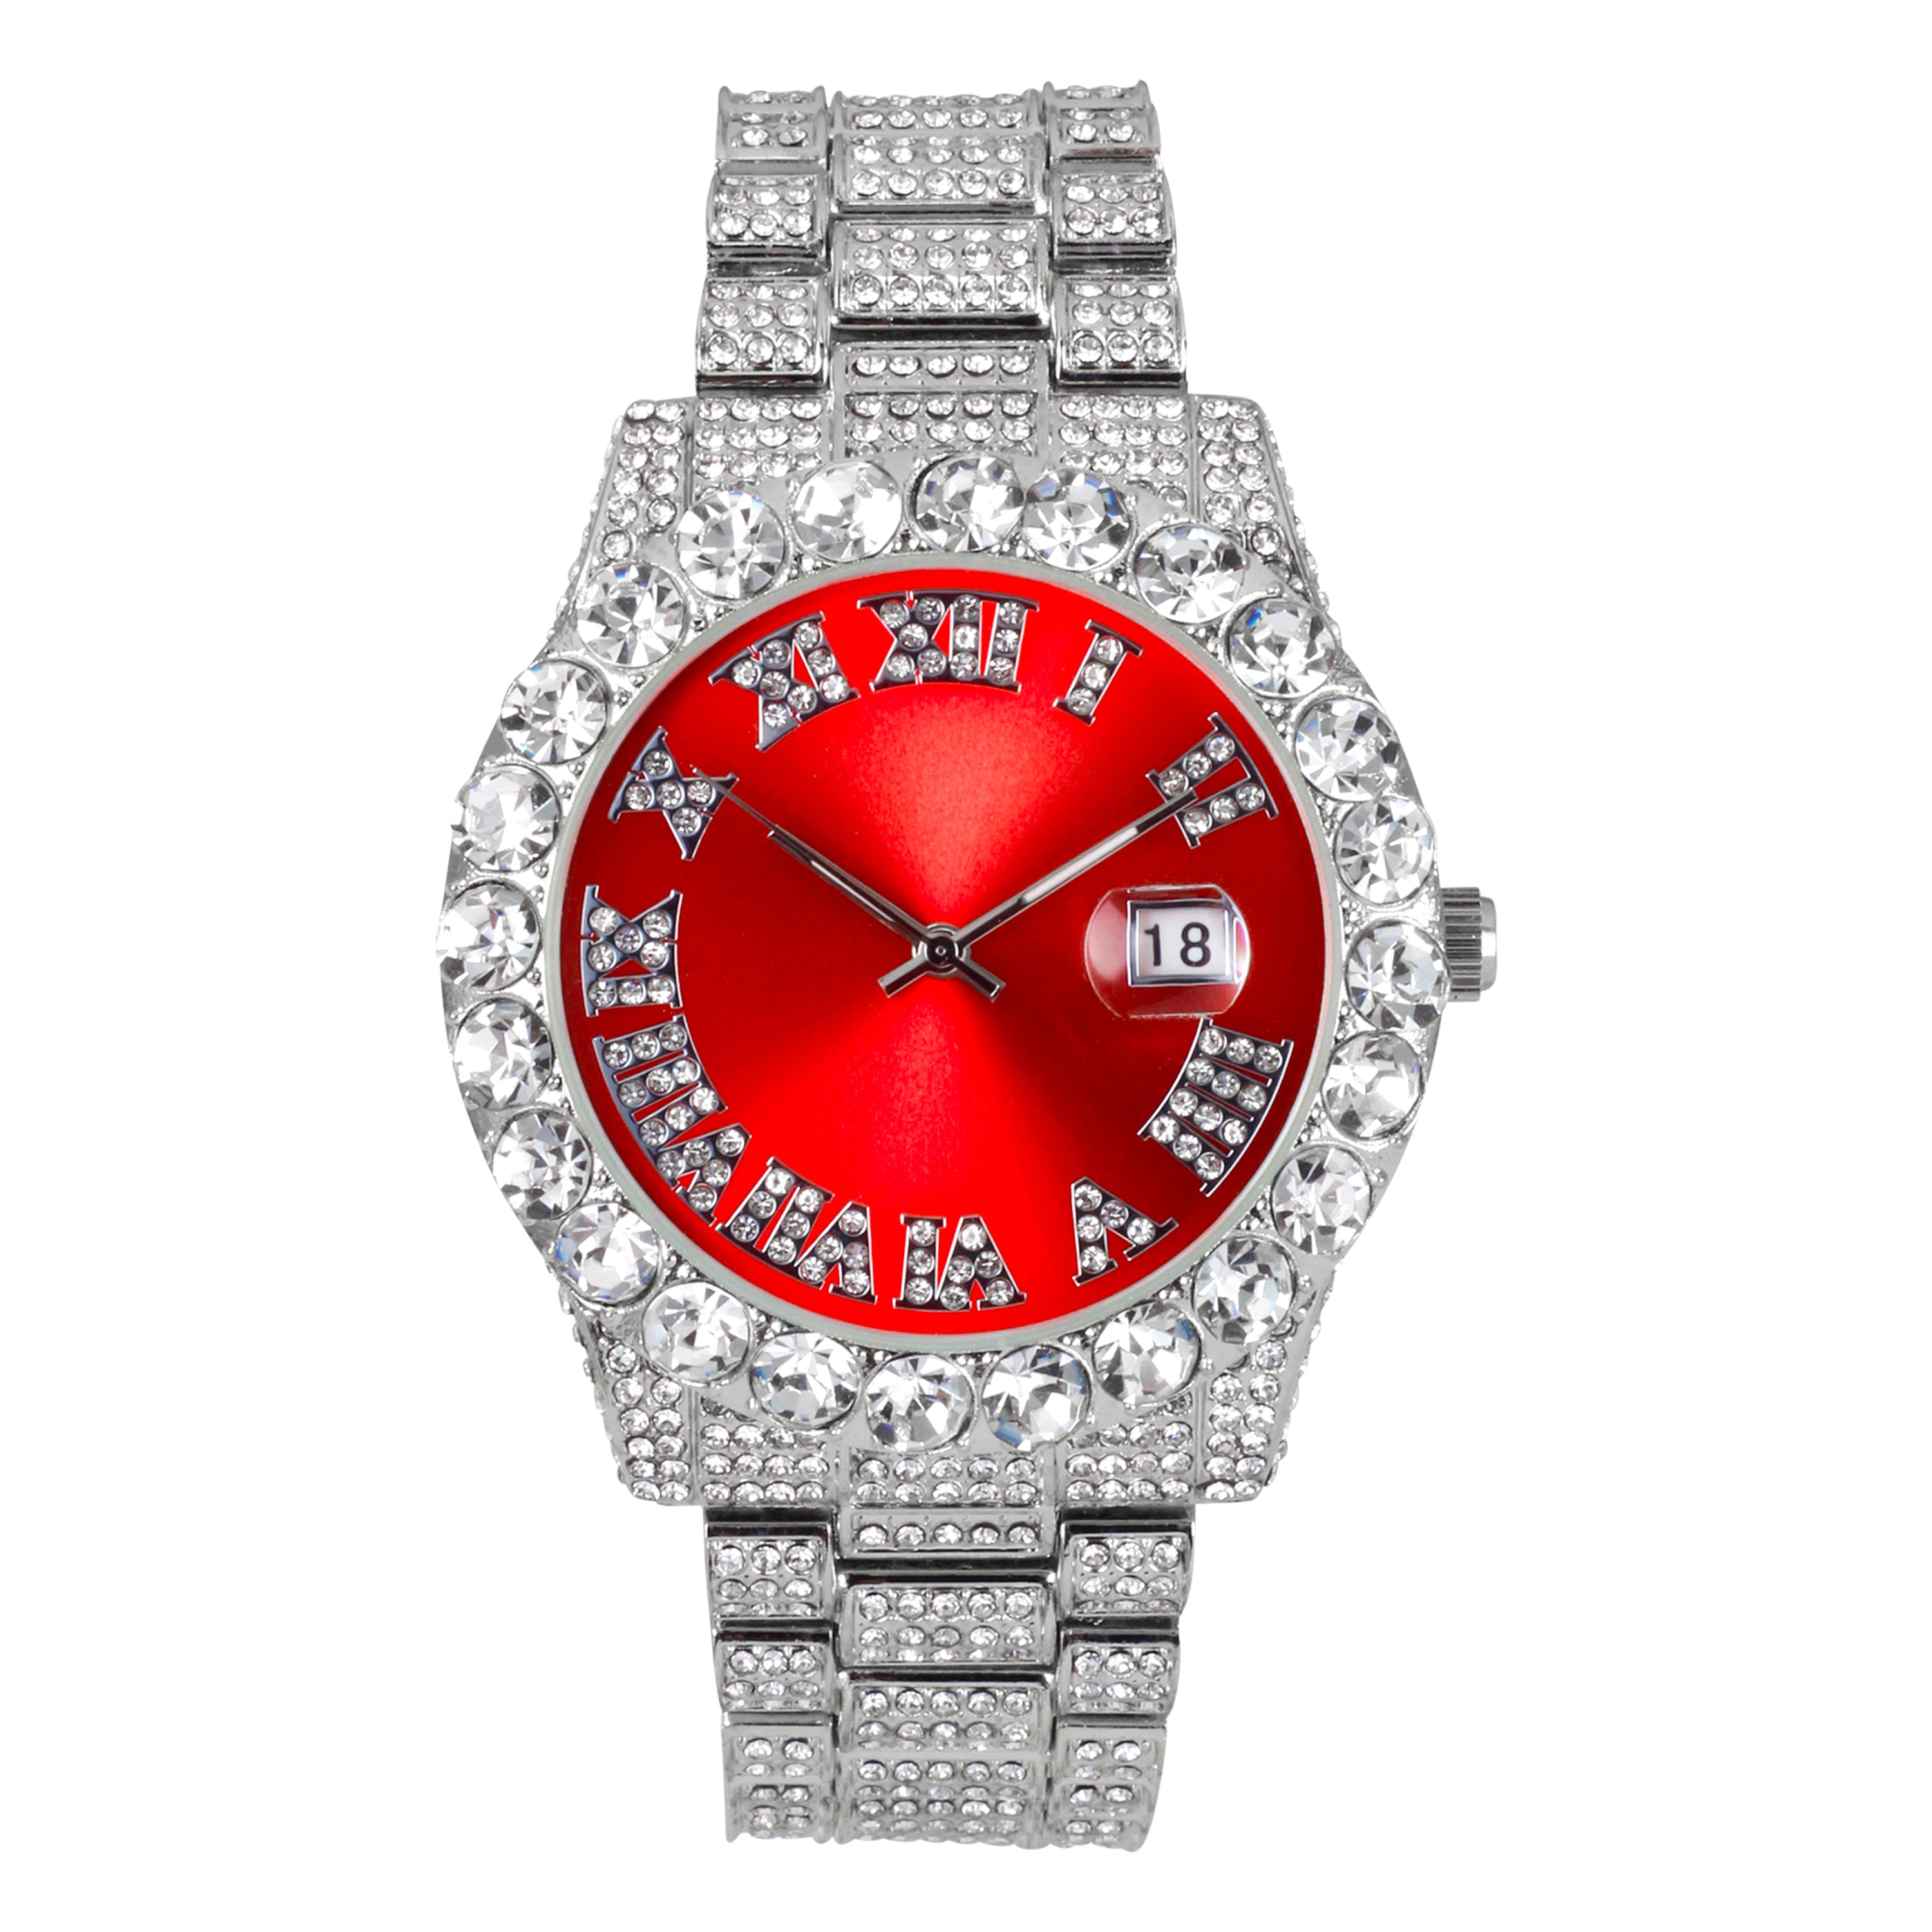 Men's Round Iced Out Watch 42mm Silver - Roman Dial